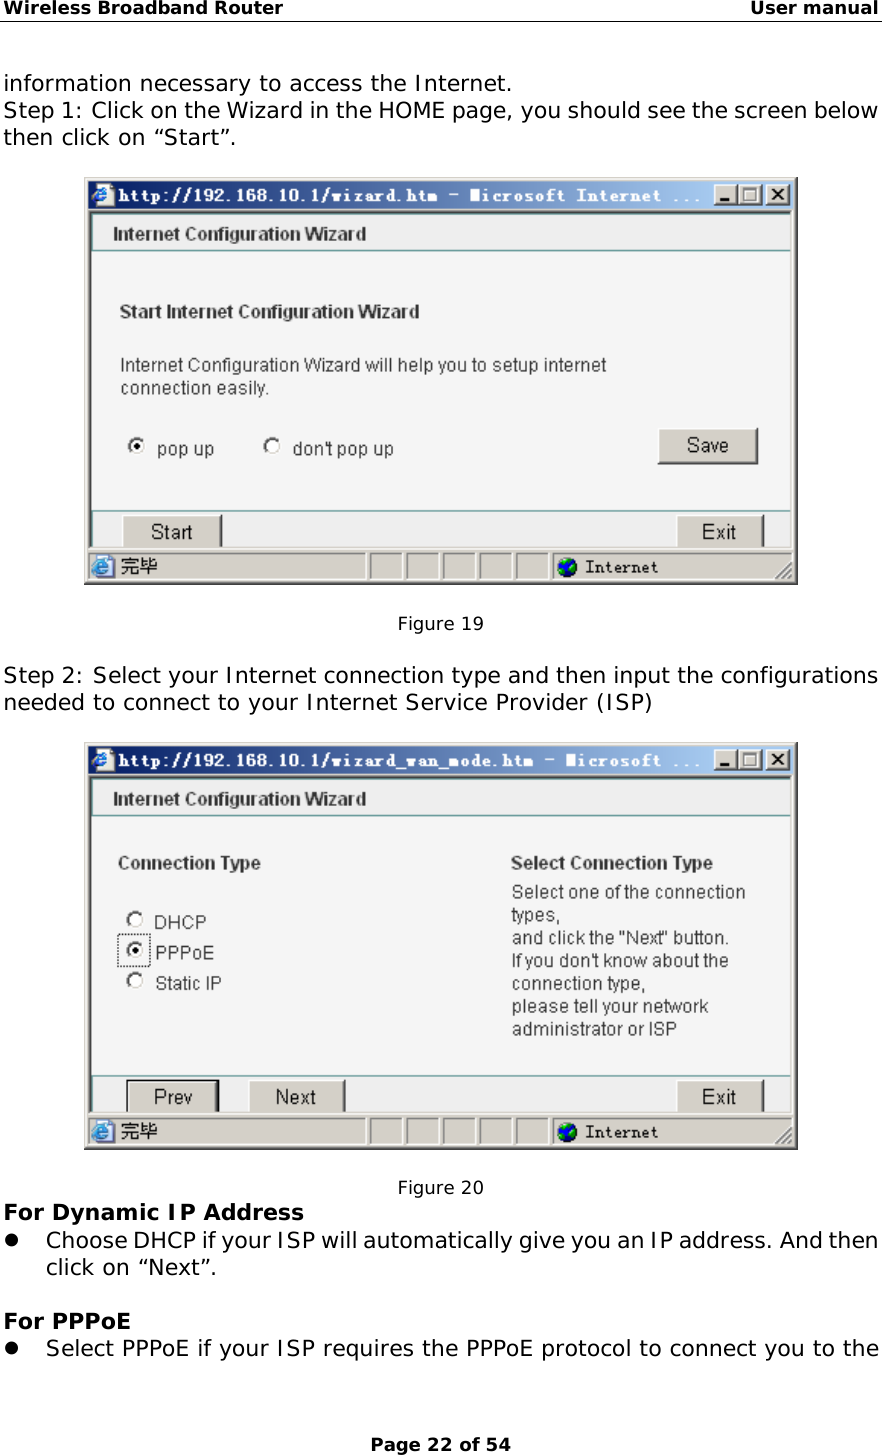 Wireless Broadband Router                                                   User manual Page 22 of 54 information necessary to access the Internet. Step 1: Click on the Wizard in the HOME page, you should see the screen below then click on “Start”.    Figure 19  Step 2: Select your Internet connection type and then input the configurations needed to connect to your Internet Service Provider (ISP)     Figure 20 For Dynamic IP Address z Choose DHCP if your ISP will automatically give you an IP address. And then click on “Next”.  For PPPoE z Select PPPoE if your ISP requires the PPPoE protocol to connect you to the 